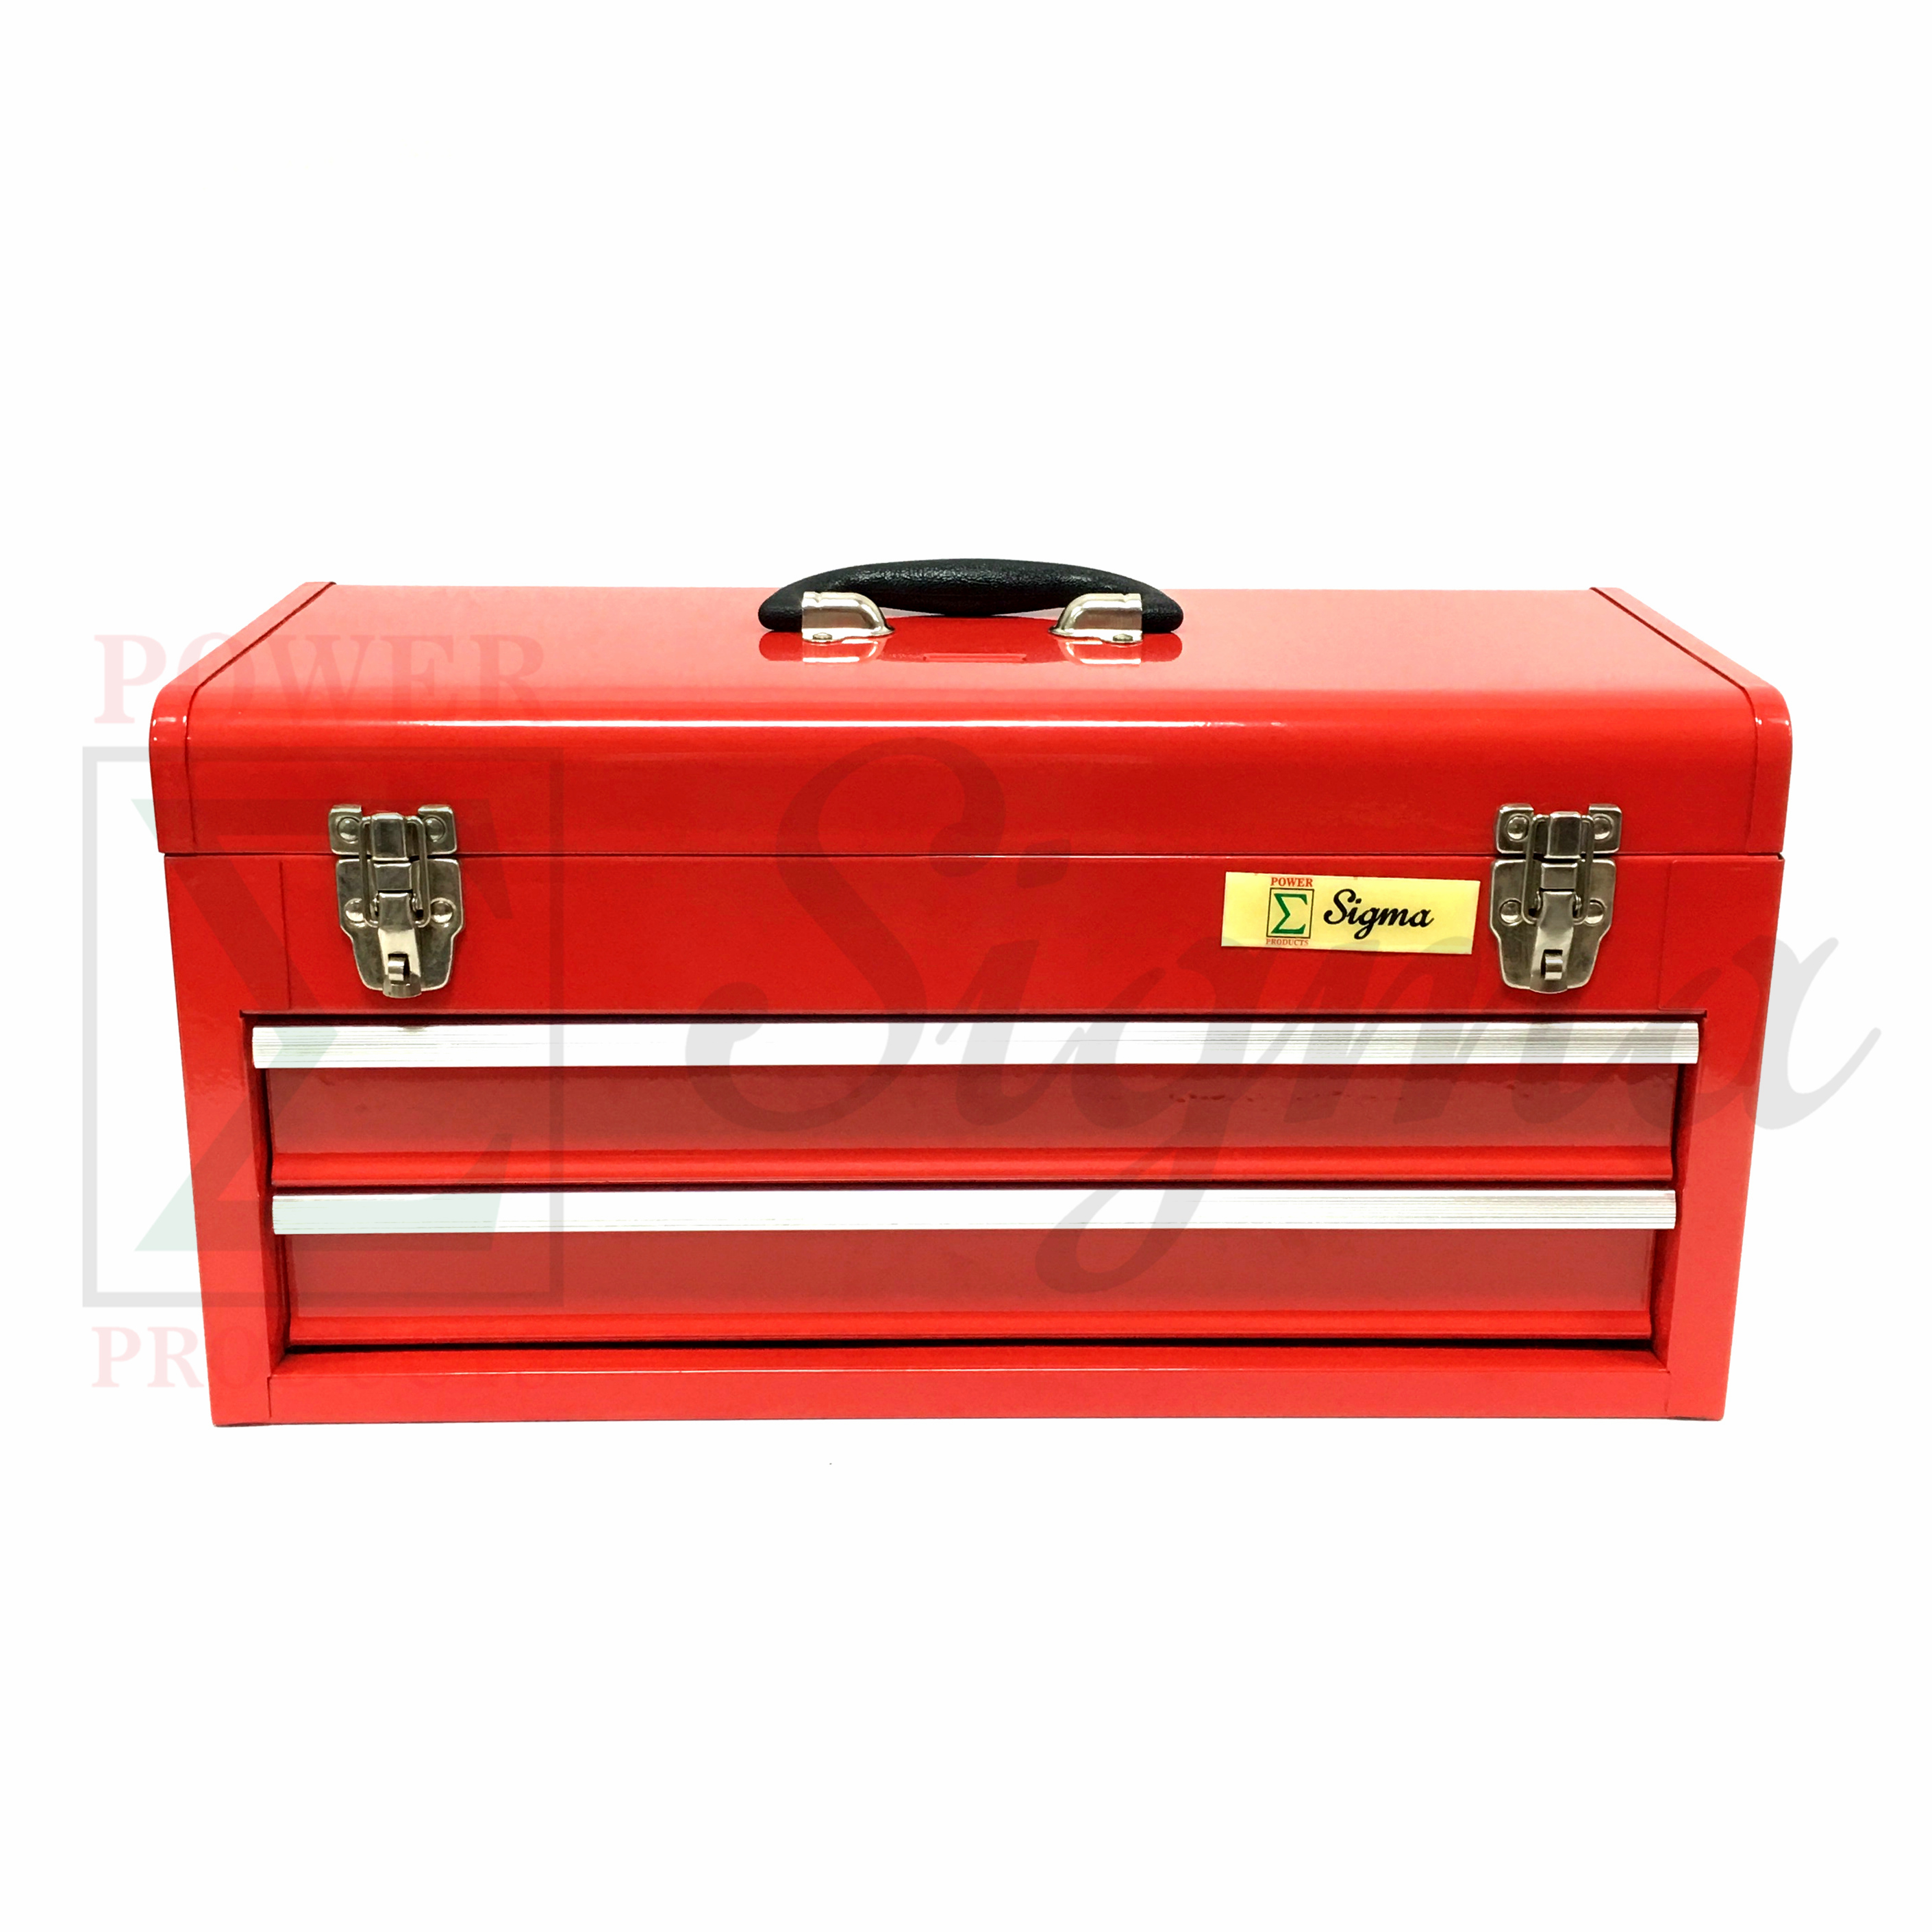 Steel Tool Cart Portable Storage Organizer with Two Drawers